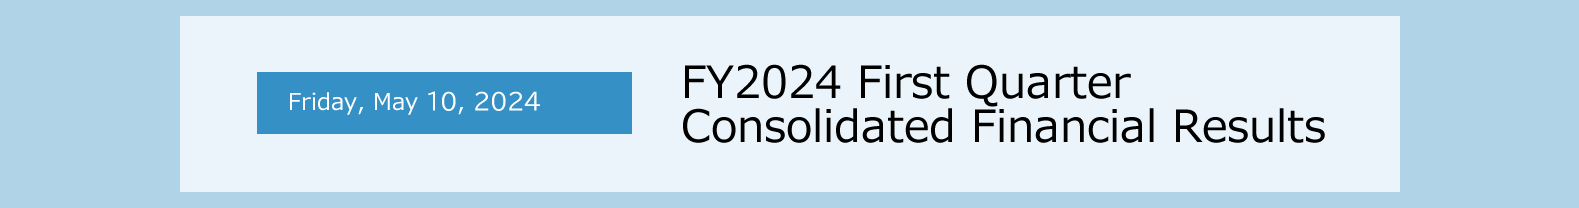 Friday, May 10, 2024 FY2024 First Quarter Consolidated Financial Results